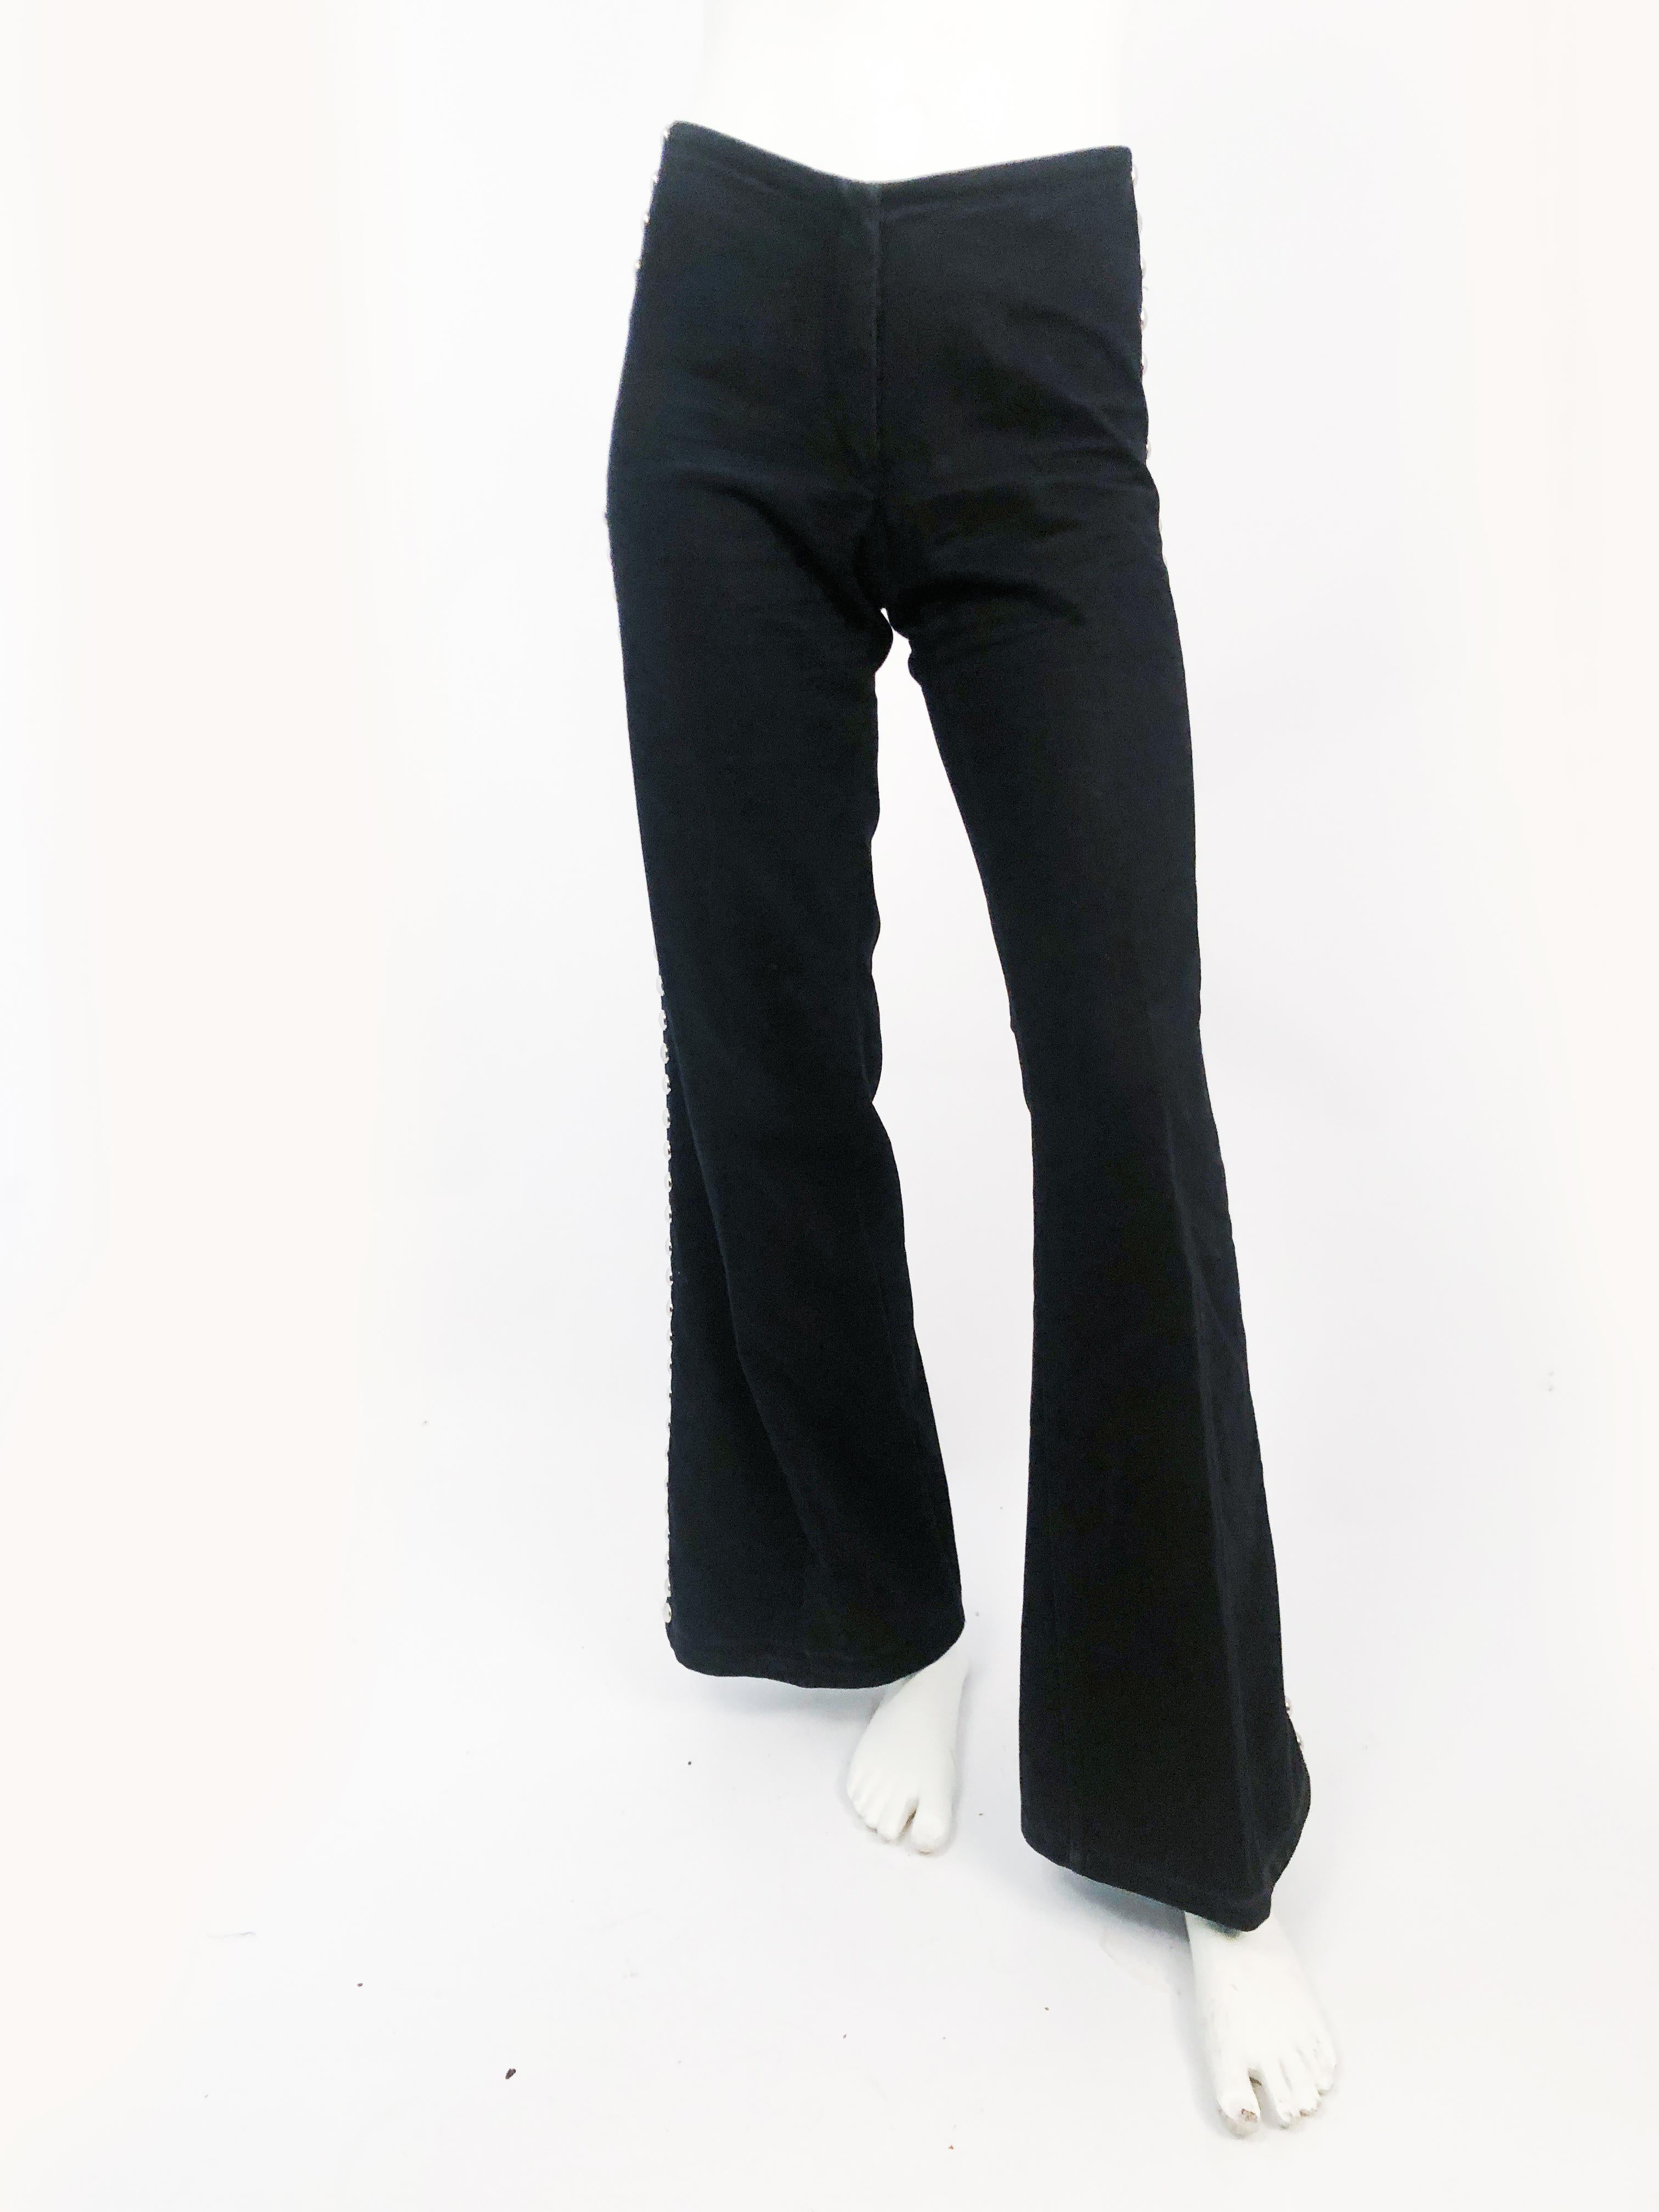 1970s Black Studded Bell-bottom Pants. Large round studs that go down the side of the pant leg and the back at the waistline.